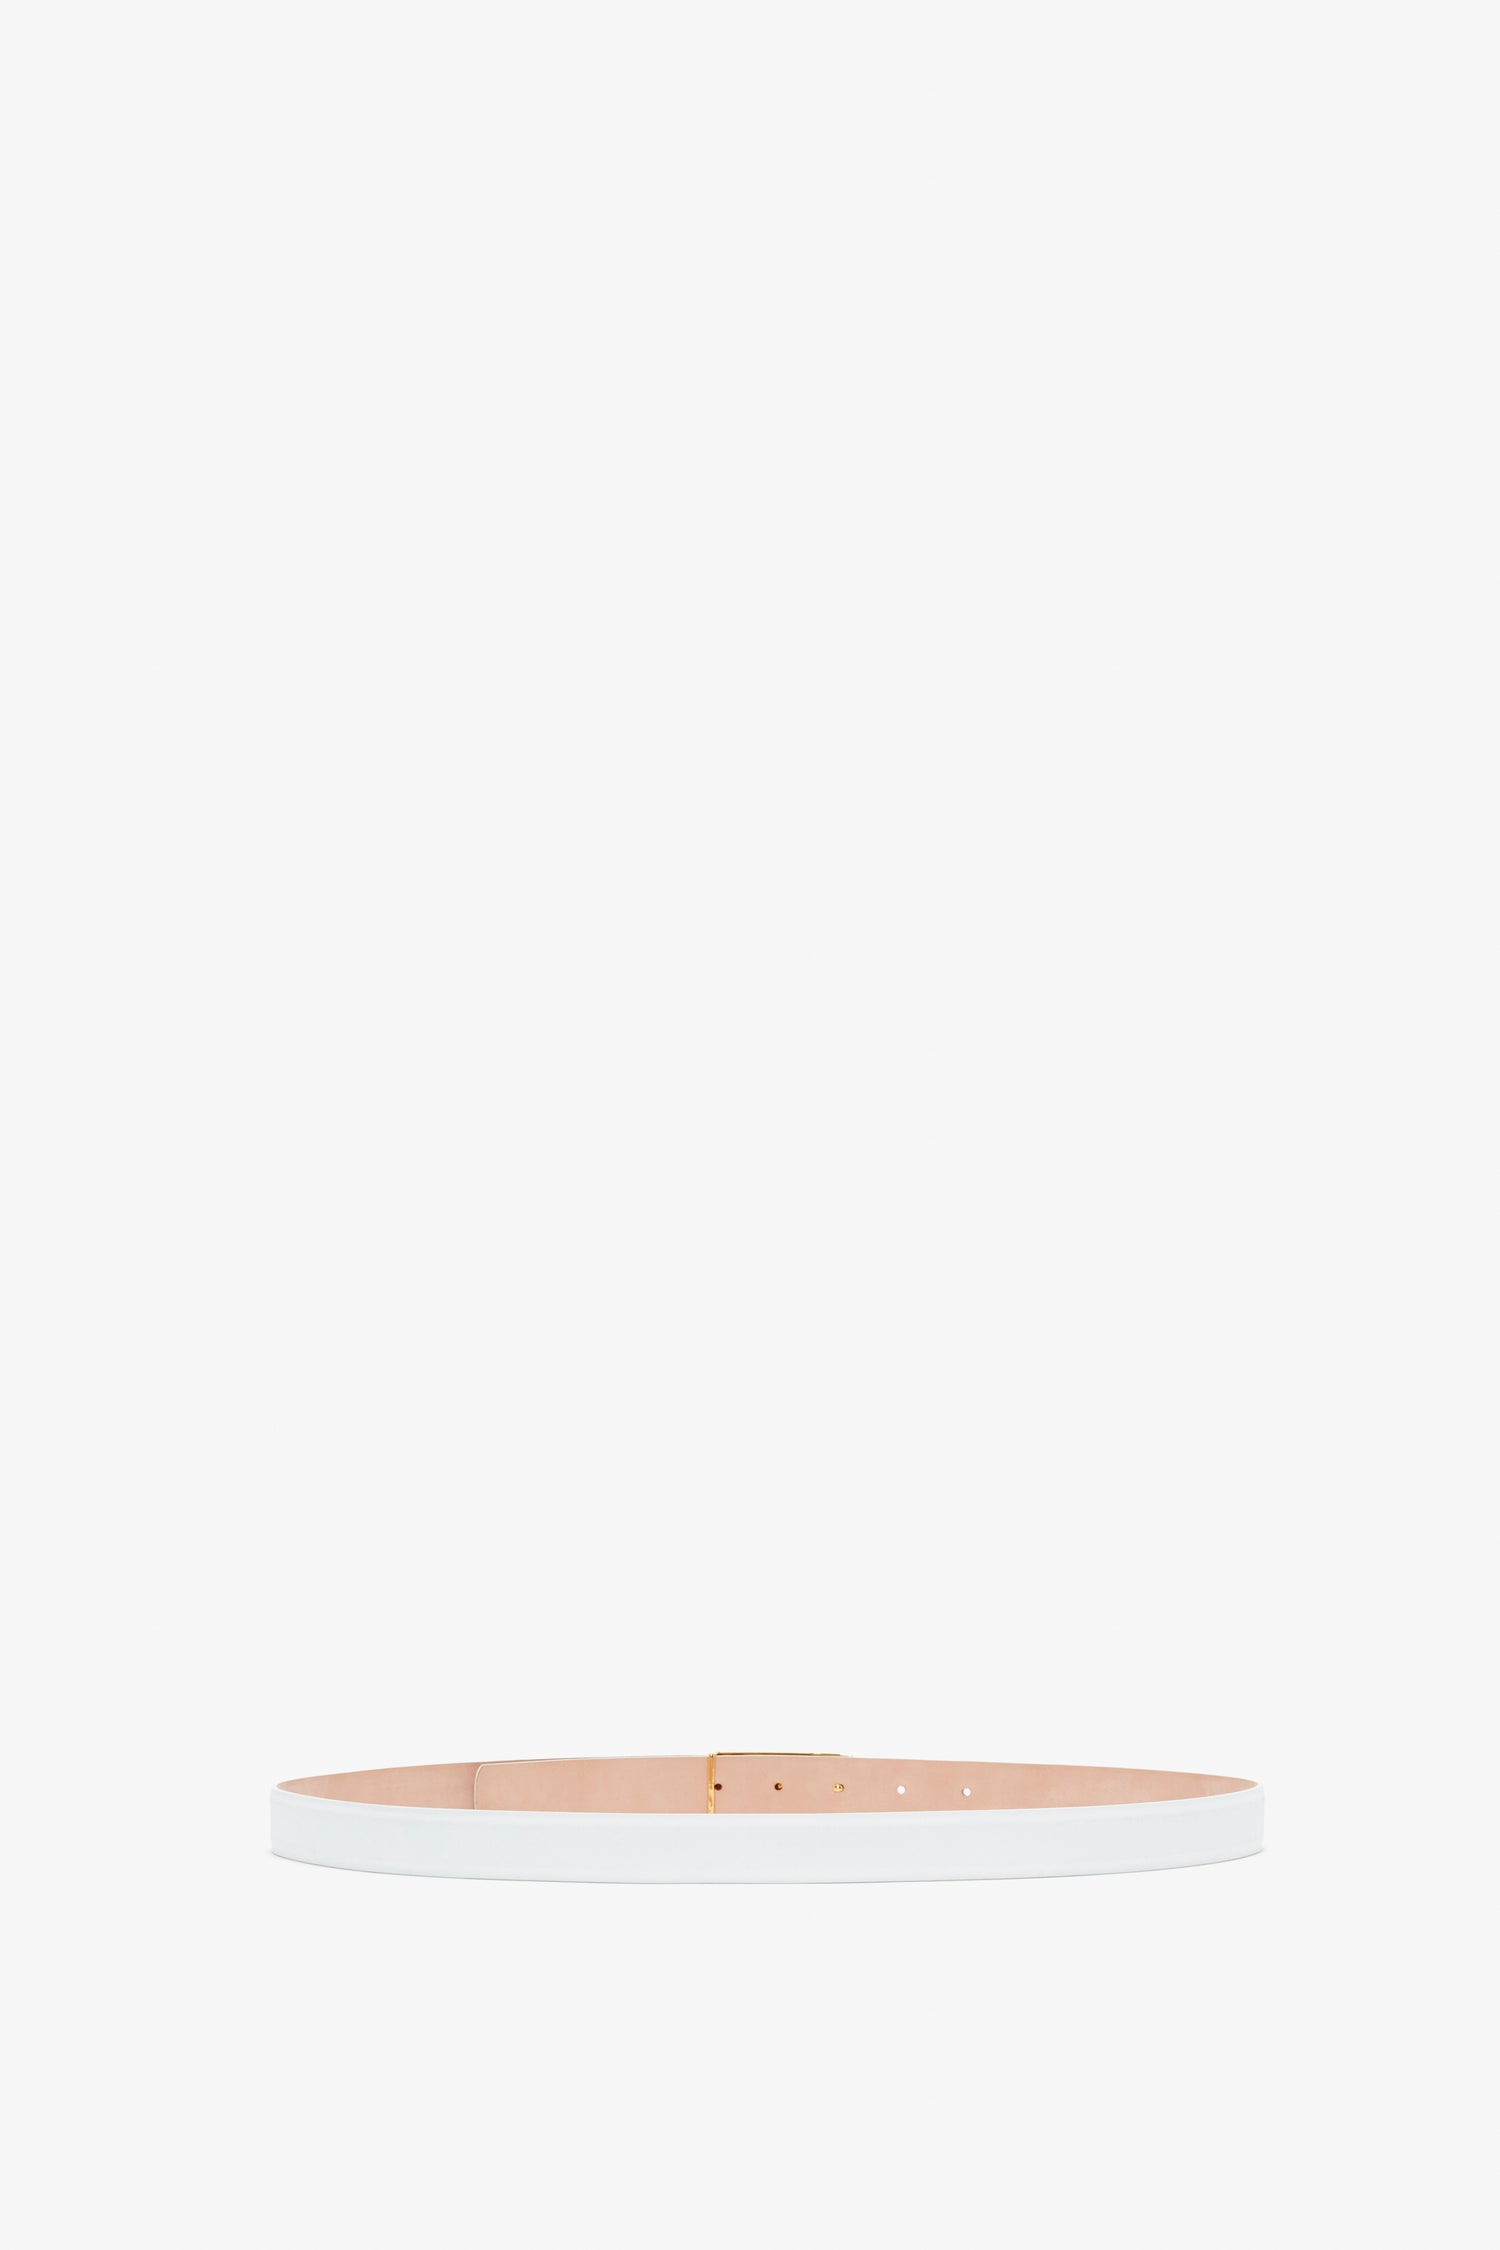 A thin, light beige Victoria Beckham Frame Belt In White Leather made of smooth calf leather, featuring a white outer side and a small gold-colored buckle, displayed on a white background.